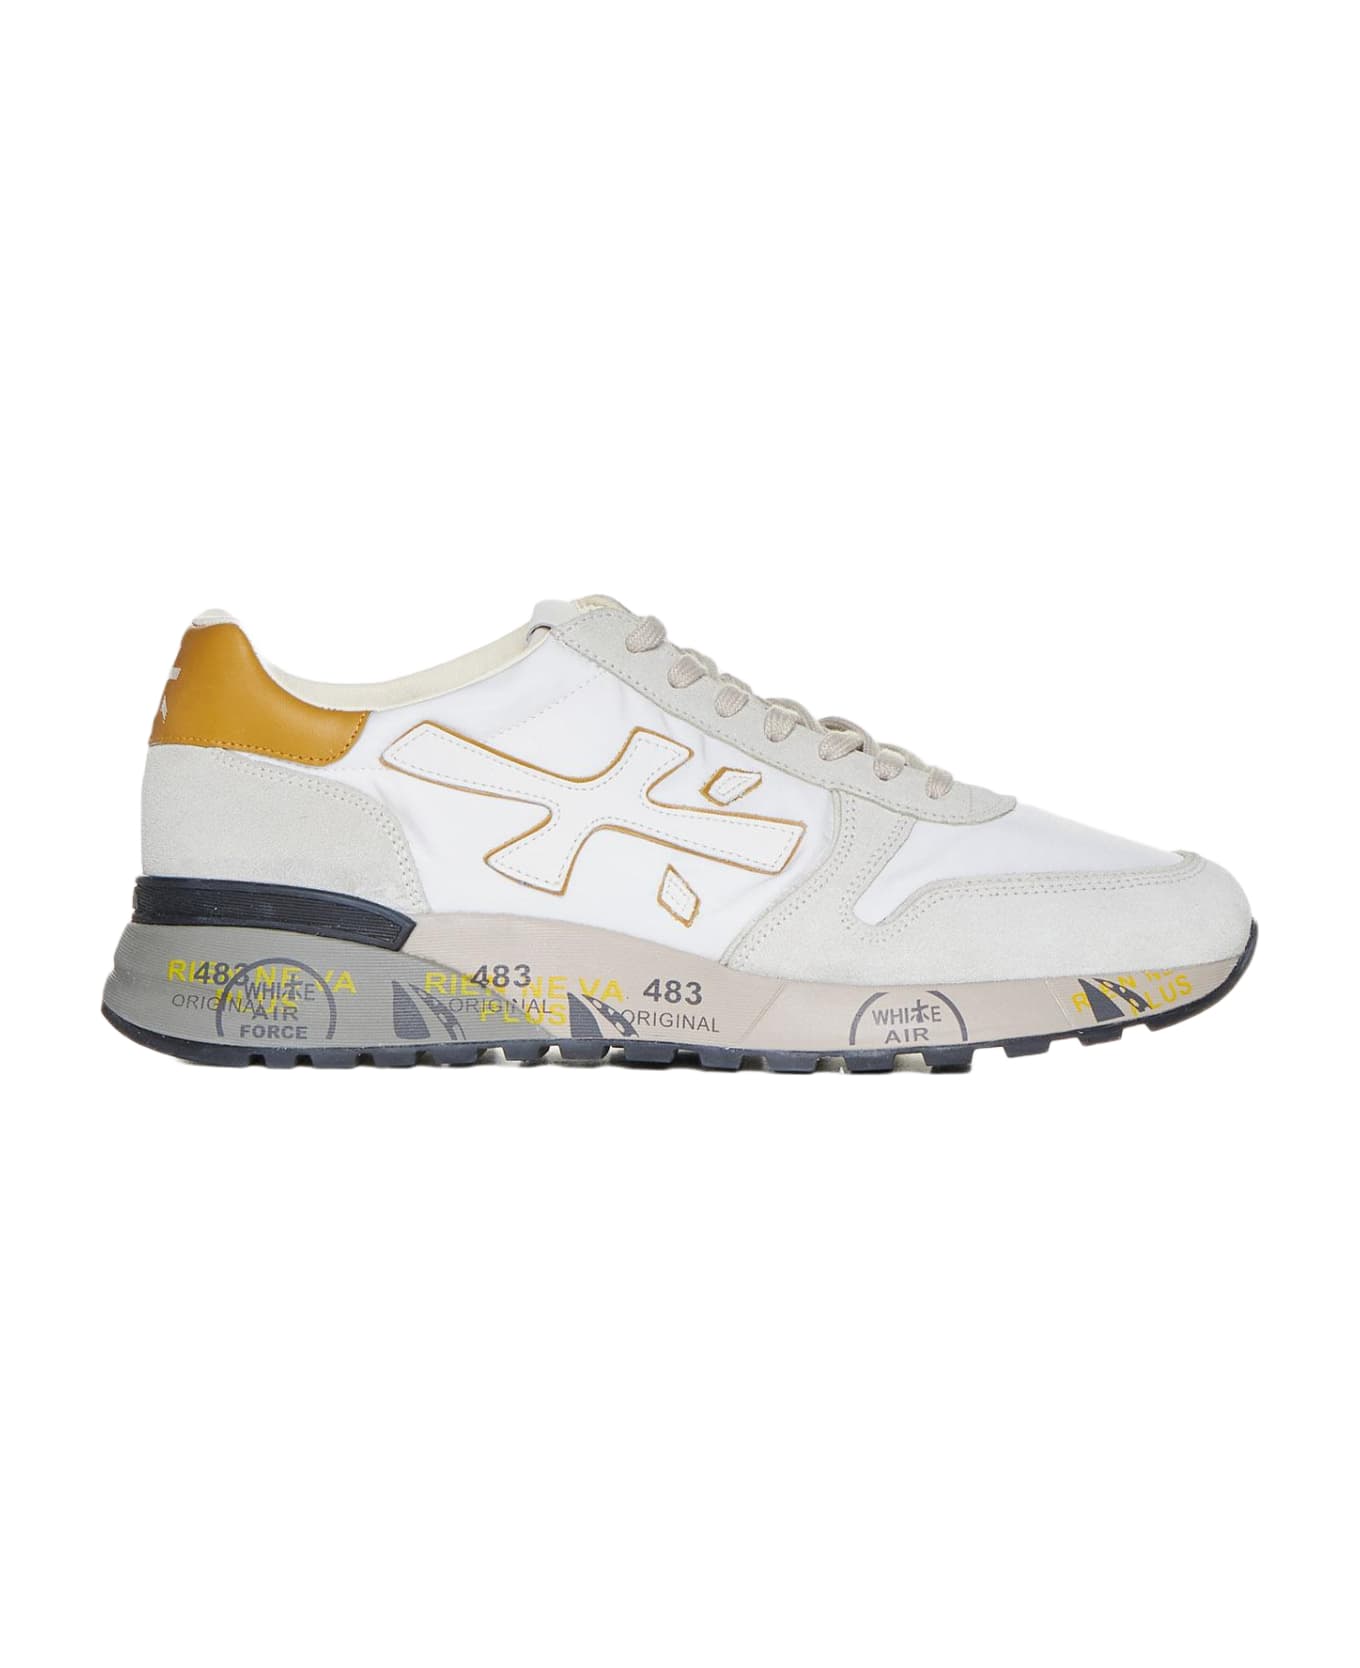 Premiata Mick Suede, Nylon And Leather Sneakers - Bianco スニーカー